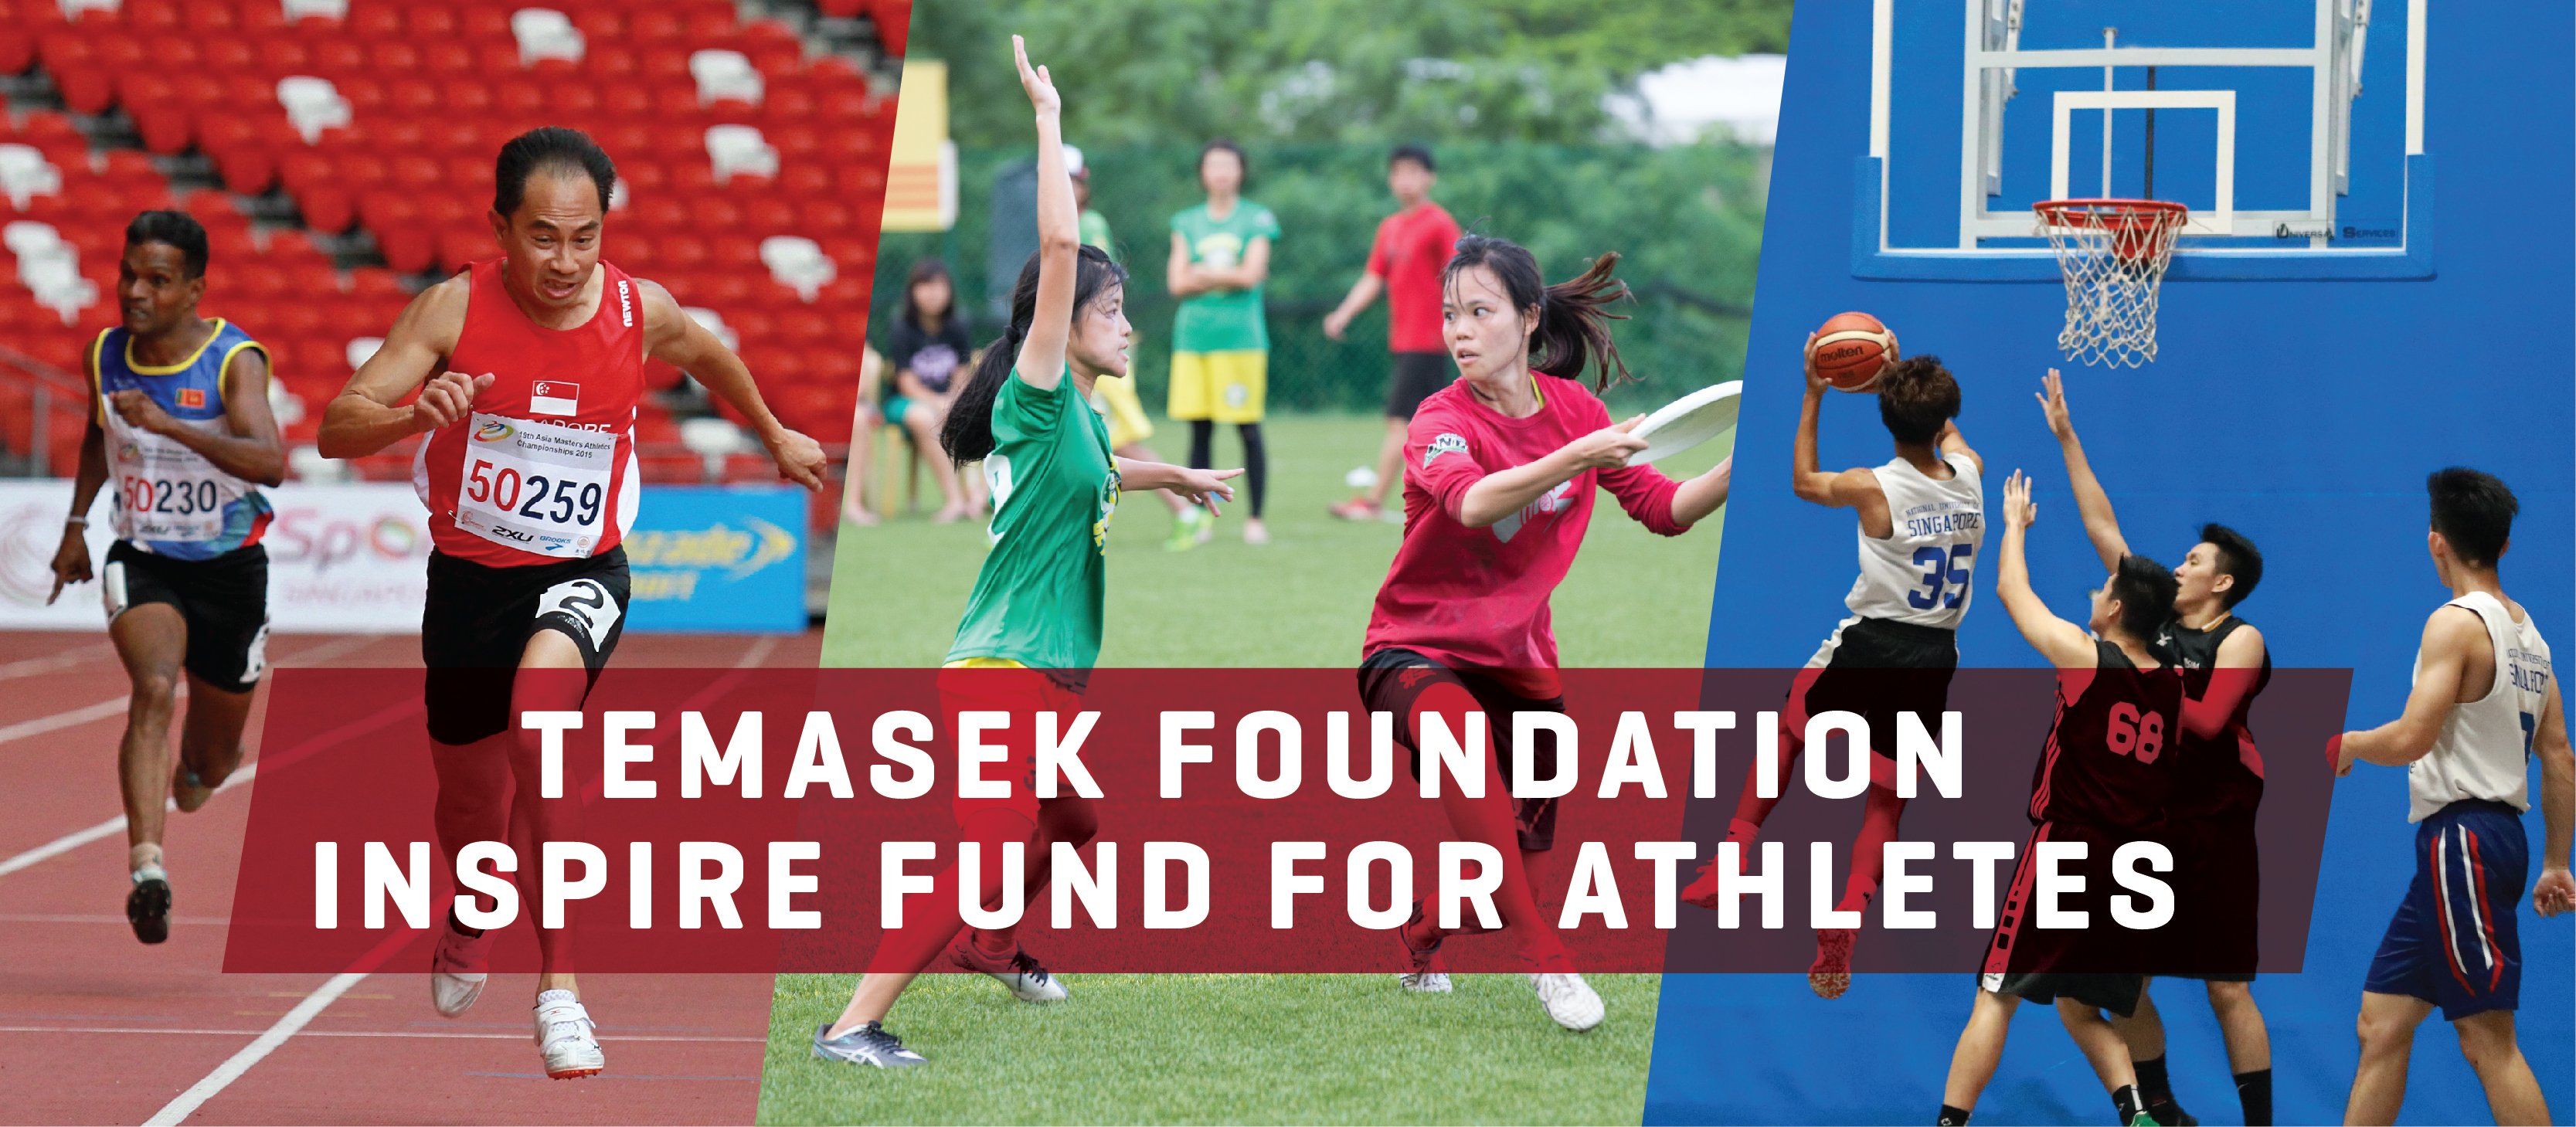 Temasek Foundation Inspire Fund for Athletes - Applications are now Open!